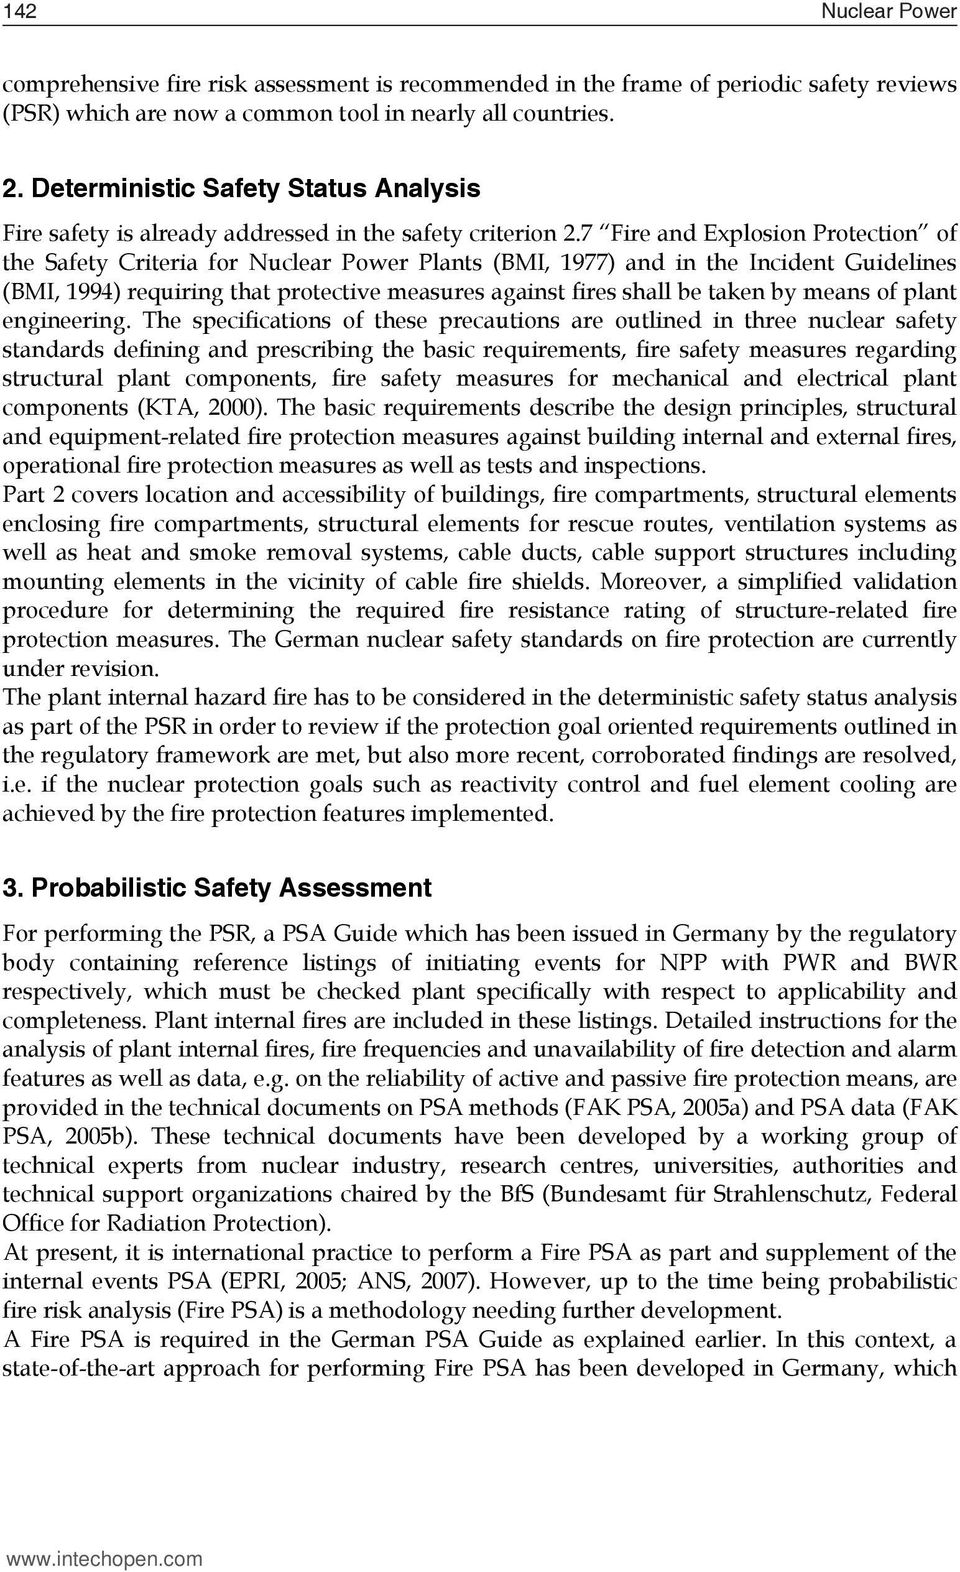 7 Fire and Explosion Protection of the Safety Criteria for Nuclear Power Plants (BMI, 1977) and in the Incident Guidelines (BMI, 1994) requiring that protective measures against fires shall be taken